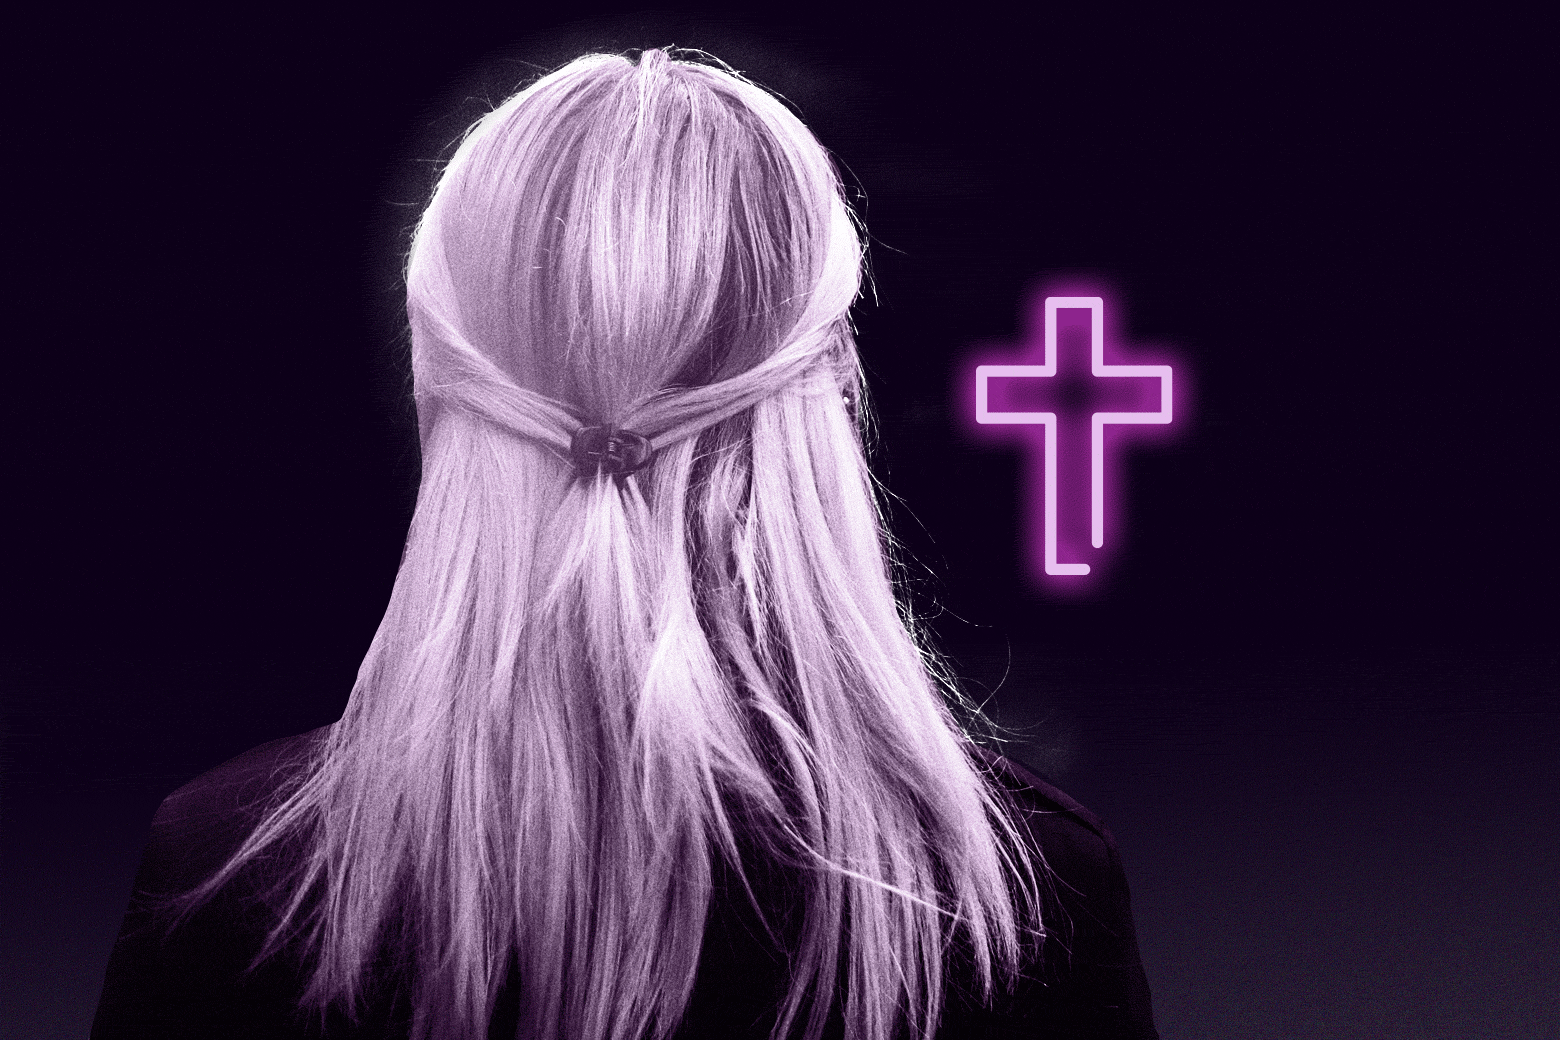 A woman with long blond hair stands facing a cross.